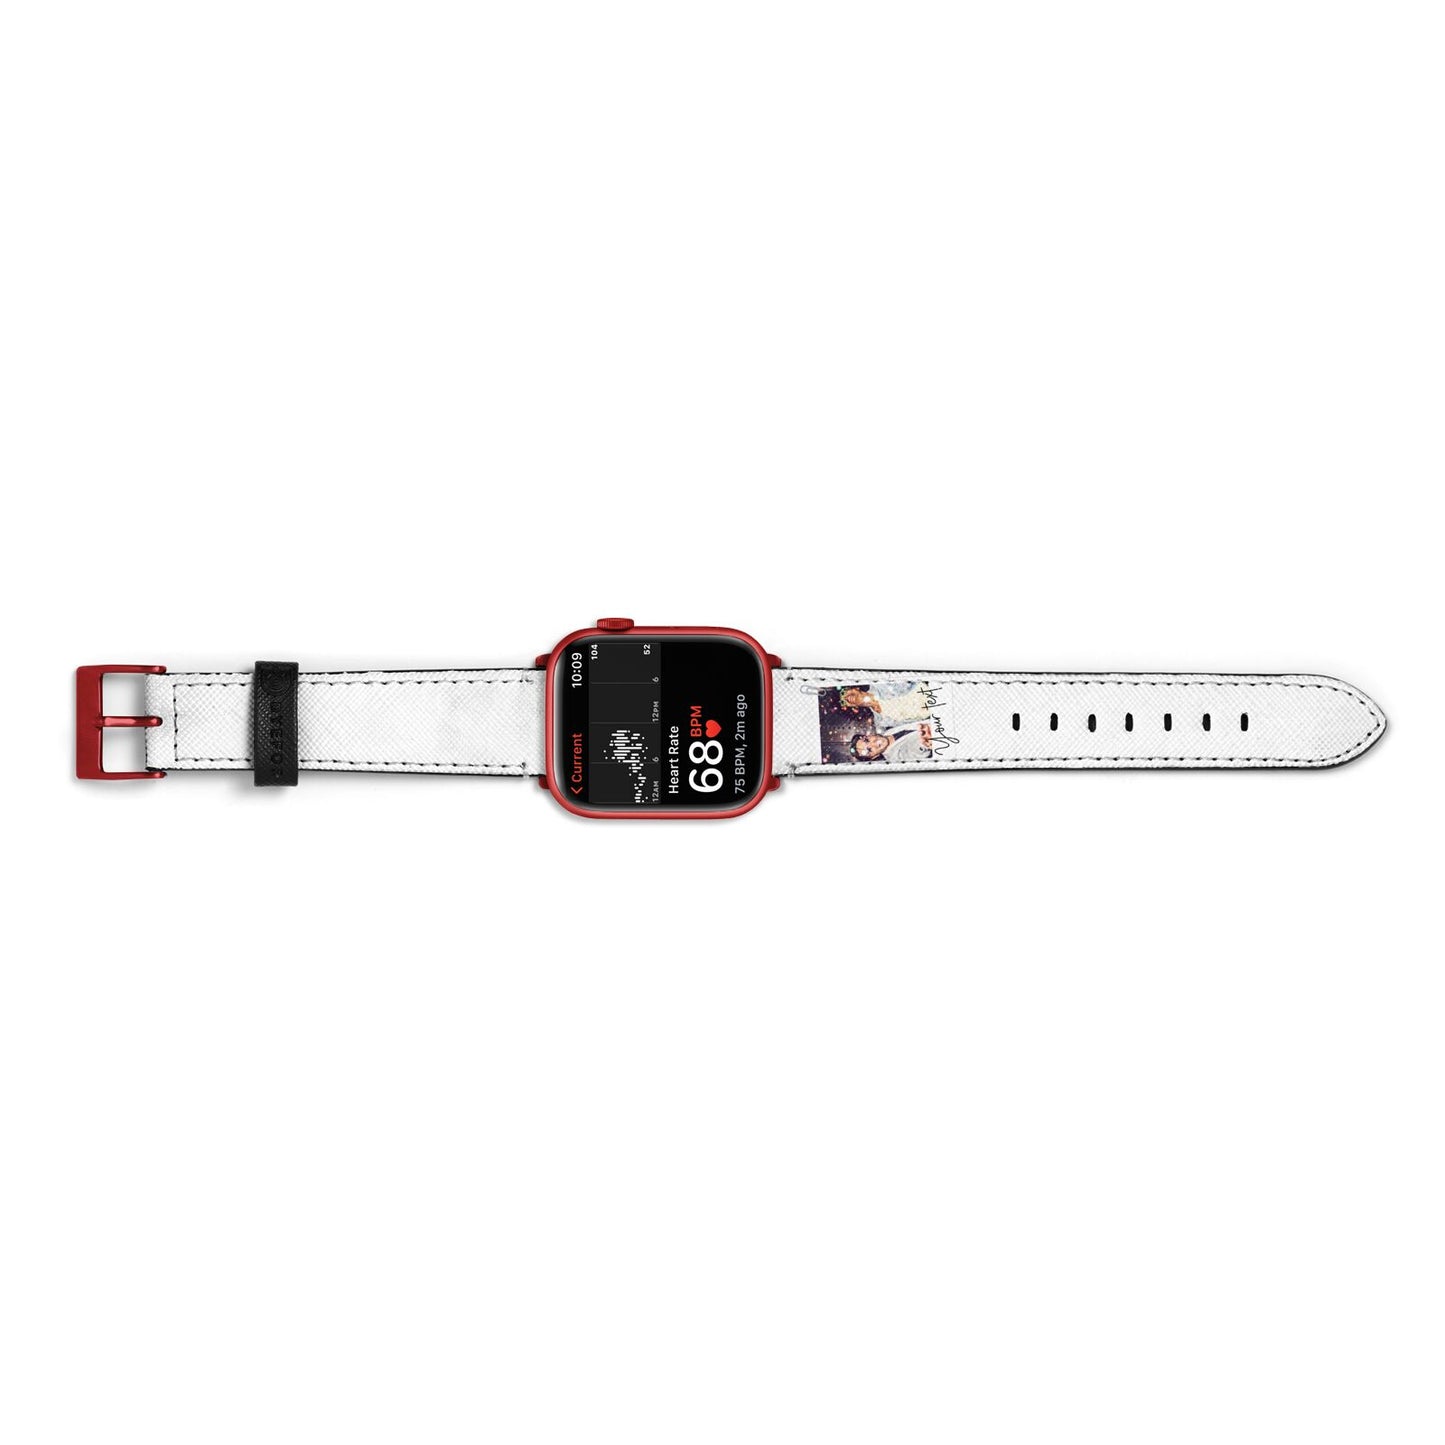 Personalised Photo with Text Apple Watch Strap Size 38mm Landscape Image Red Hardware